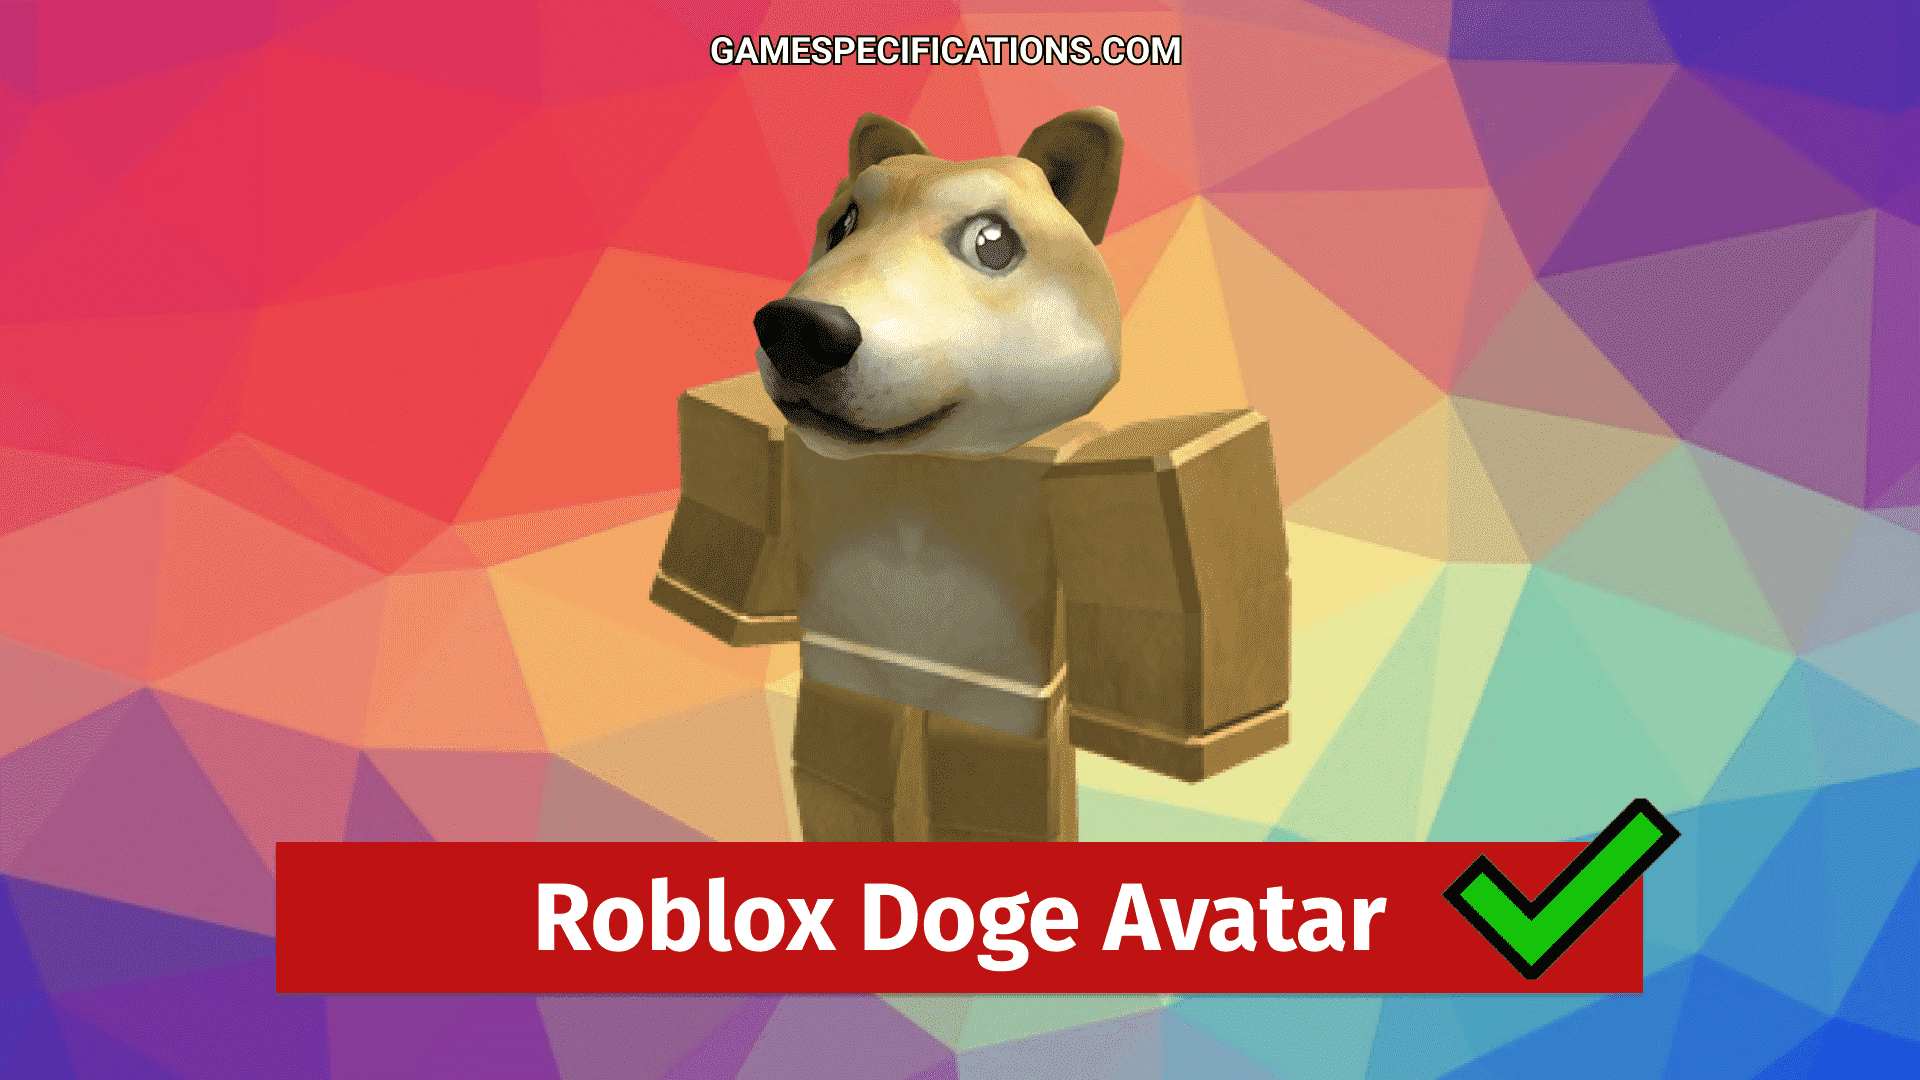 Awesome Roblox Doge Avatar Guide Game Specifications - how much robux is the doge